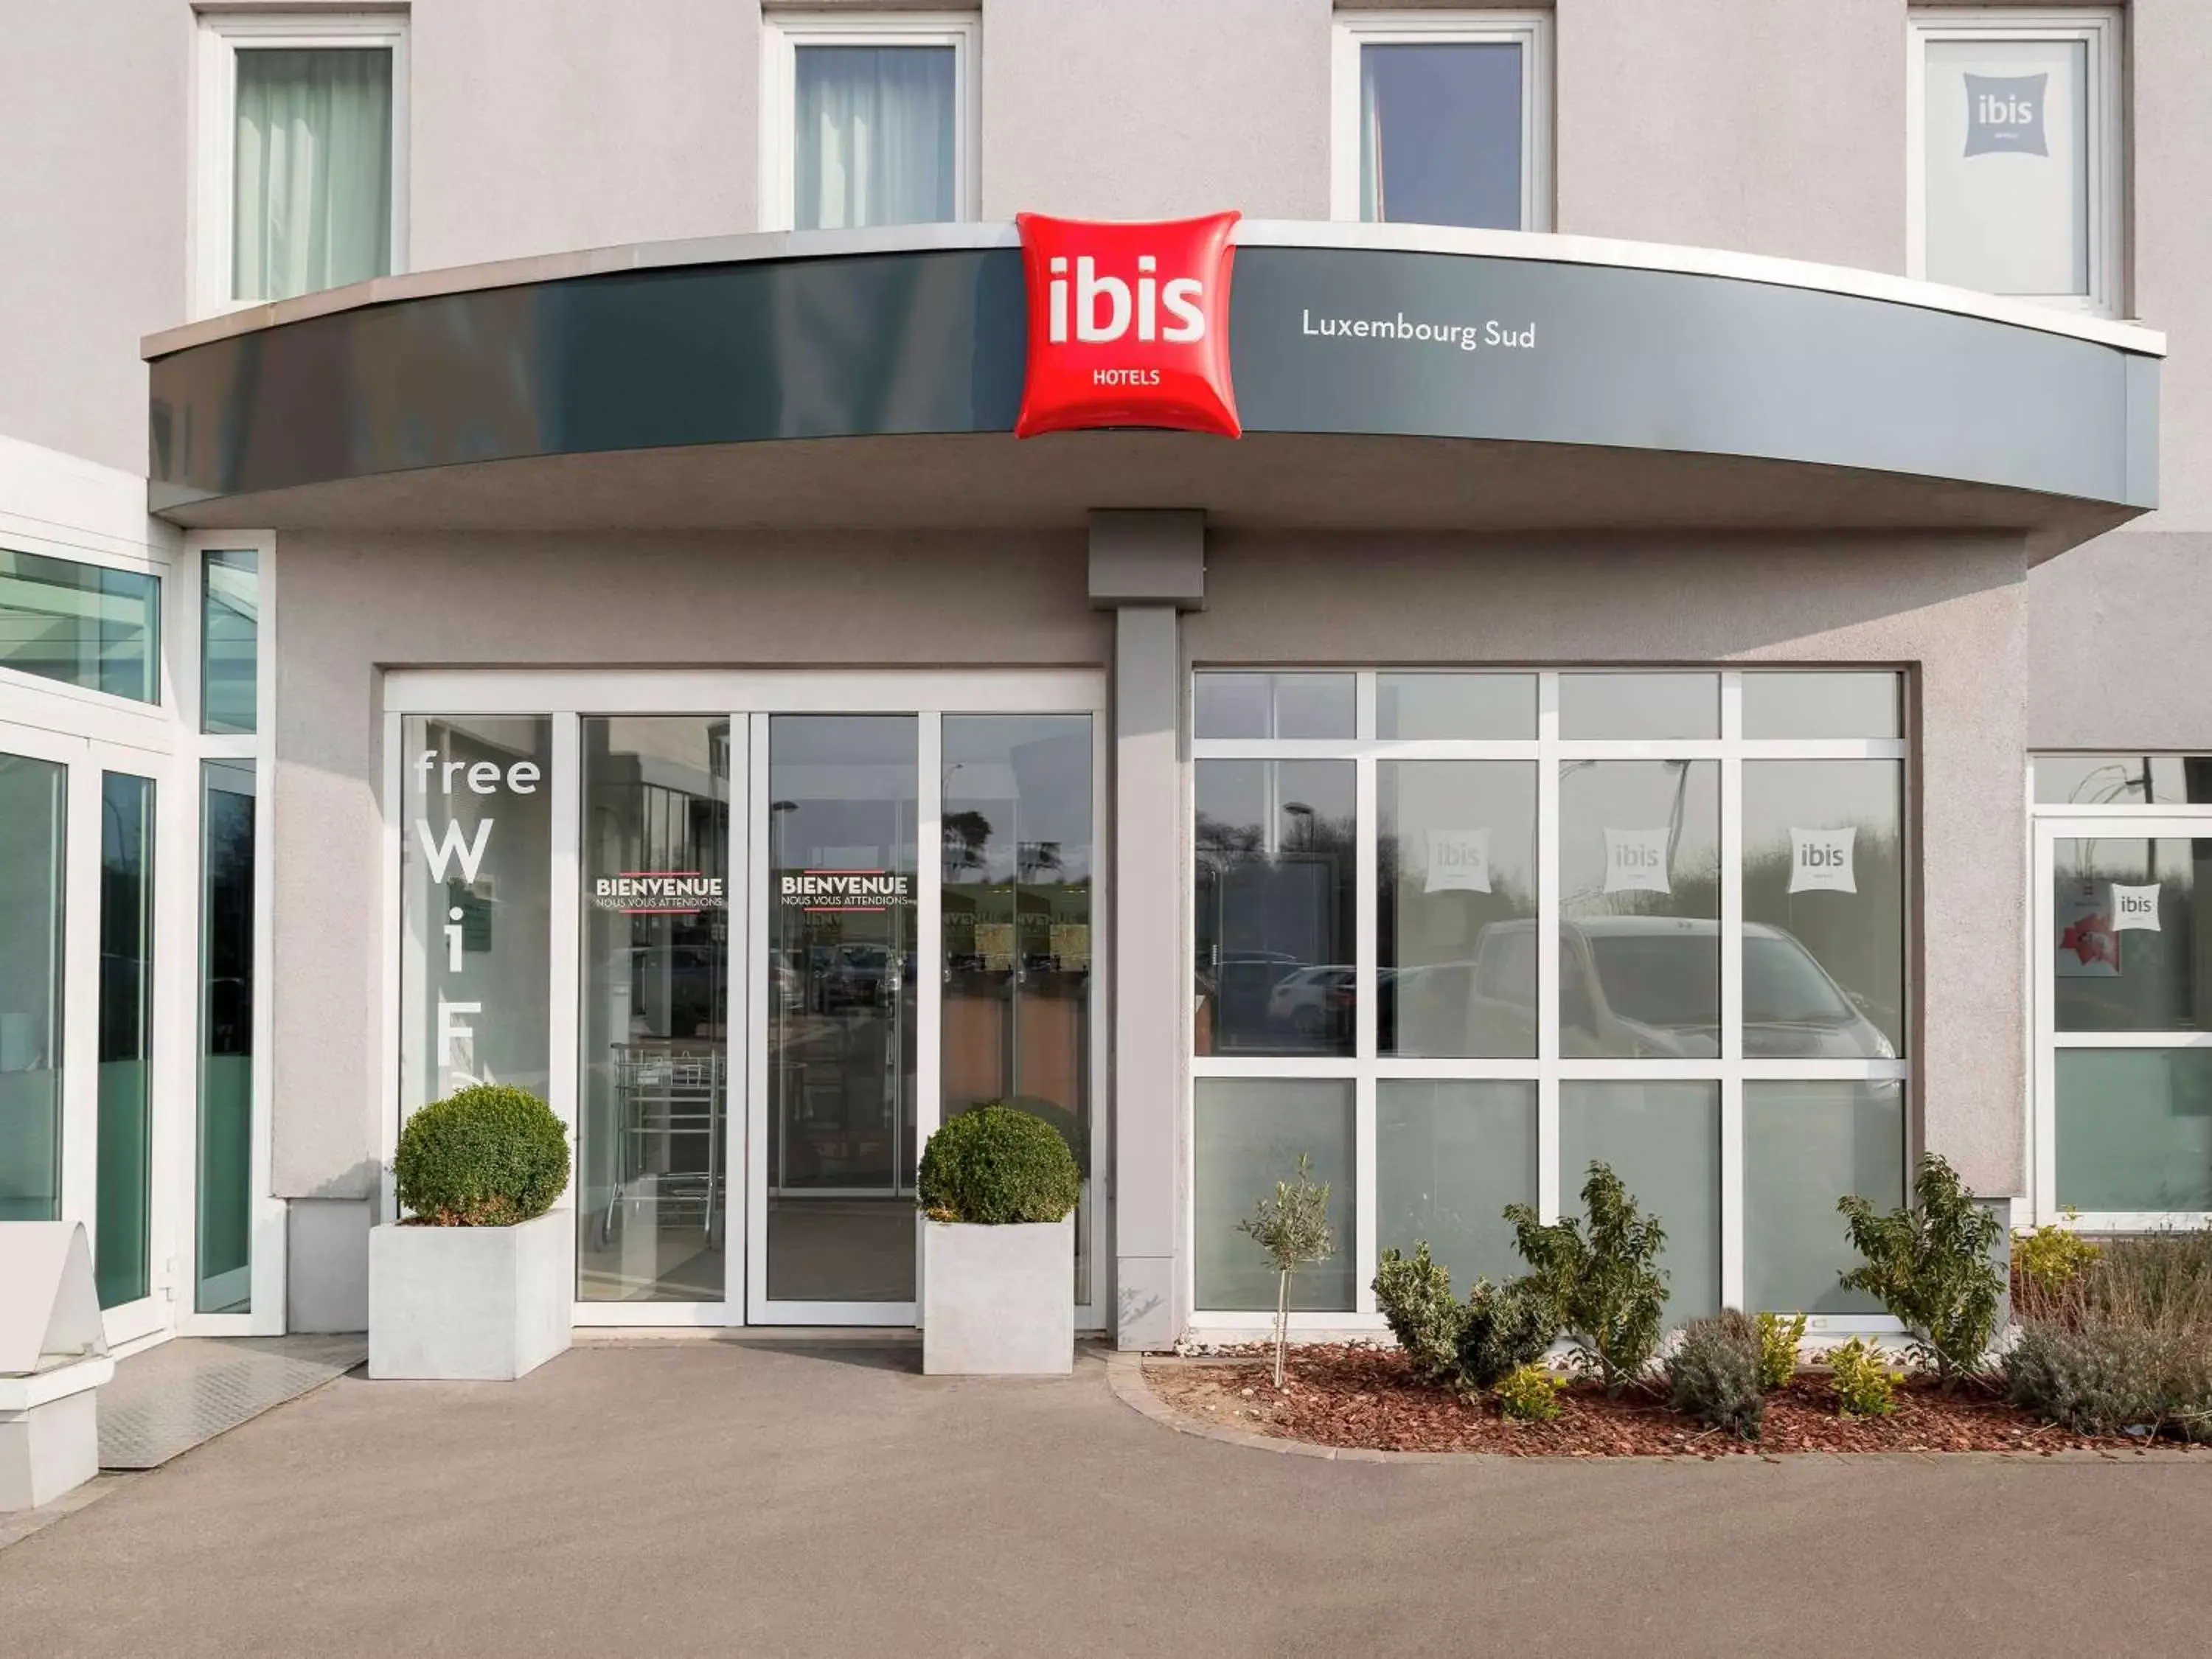 Property building in ibis Luxembourg Sud